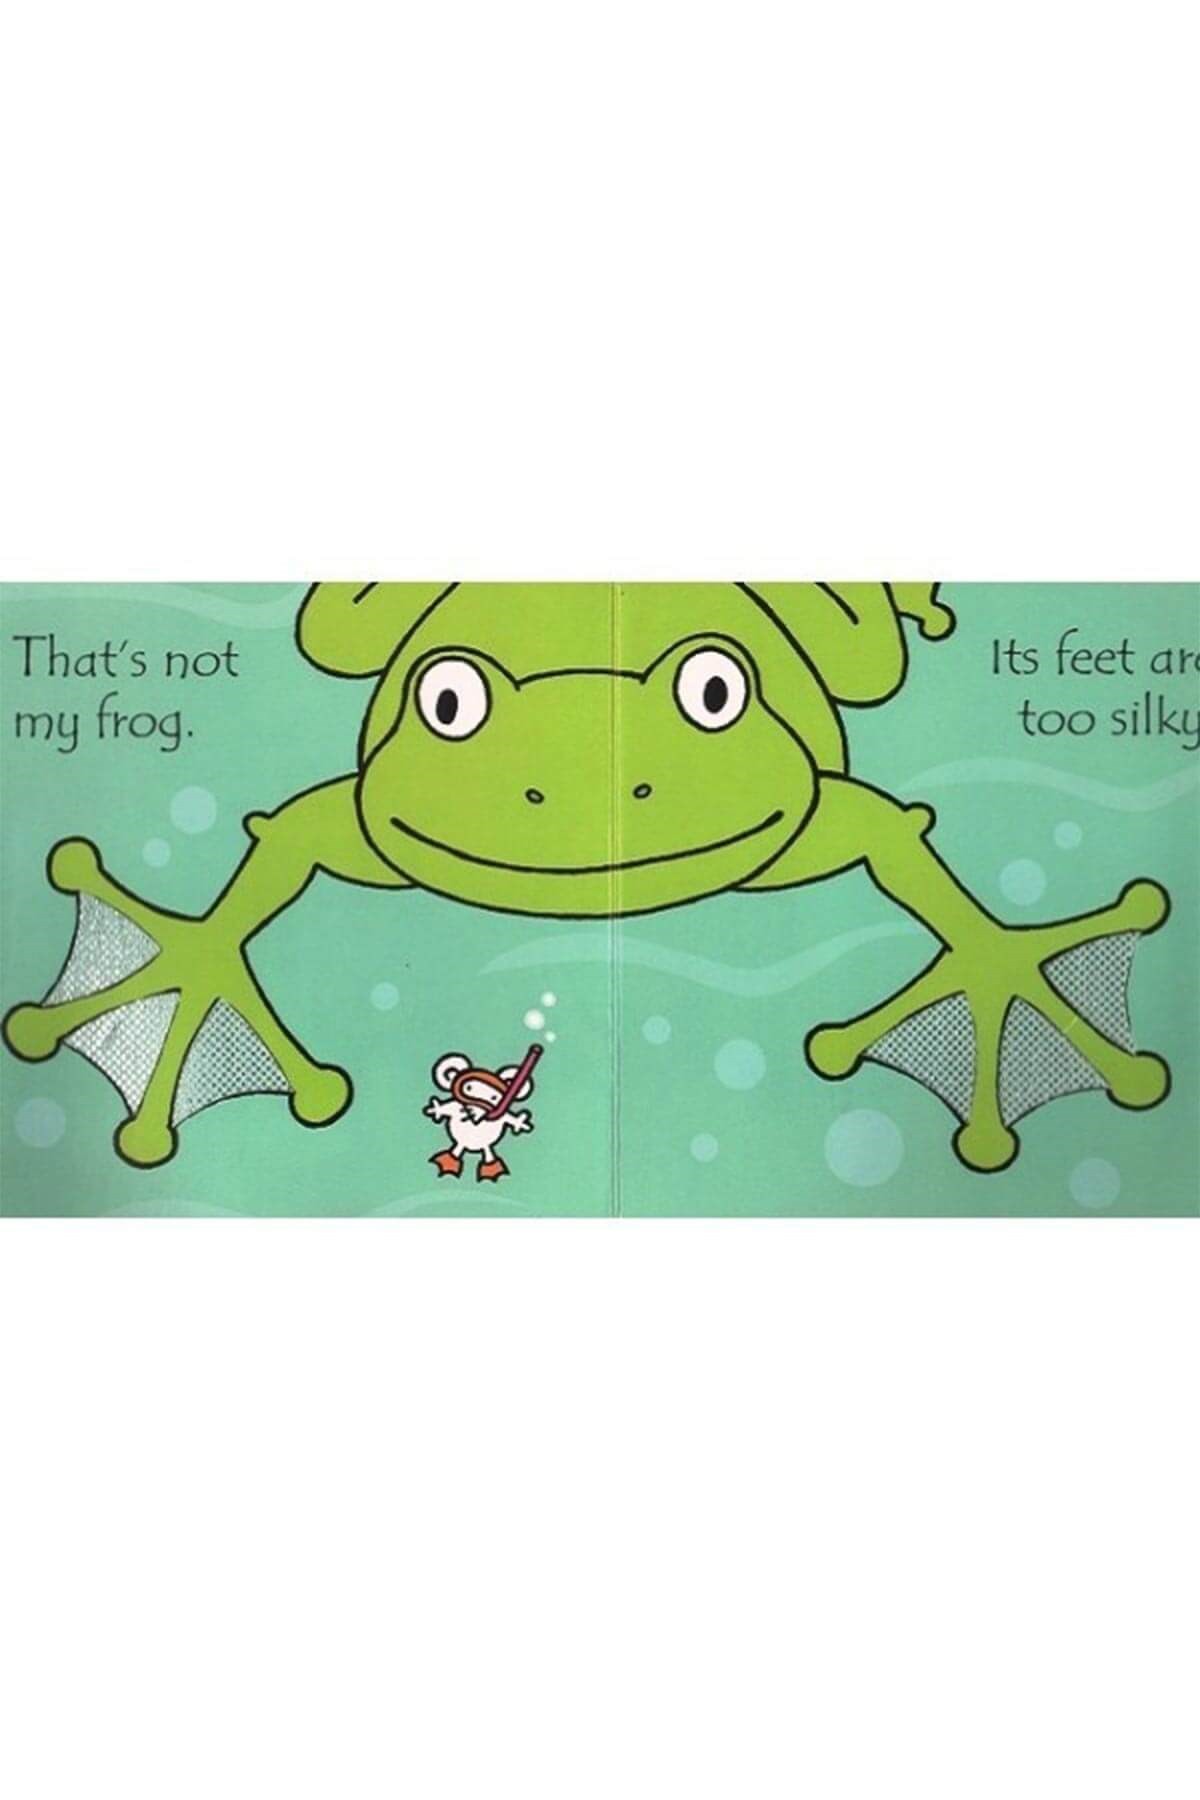 The Usborne That's Not My Frog